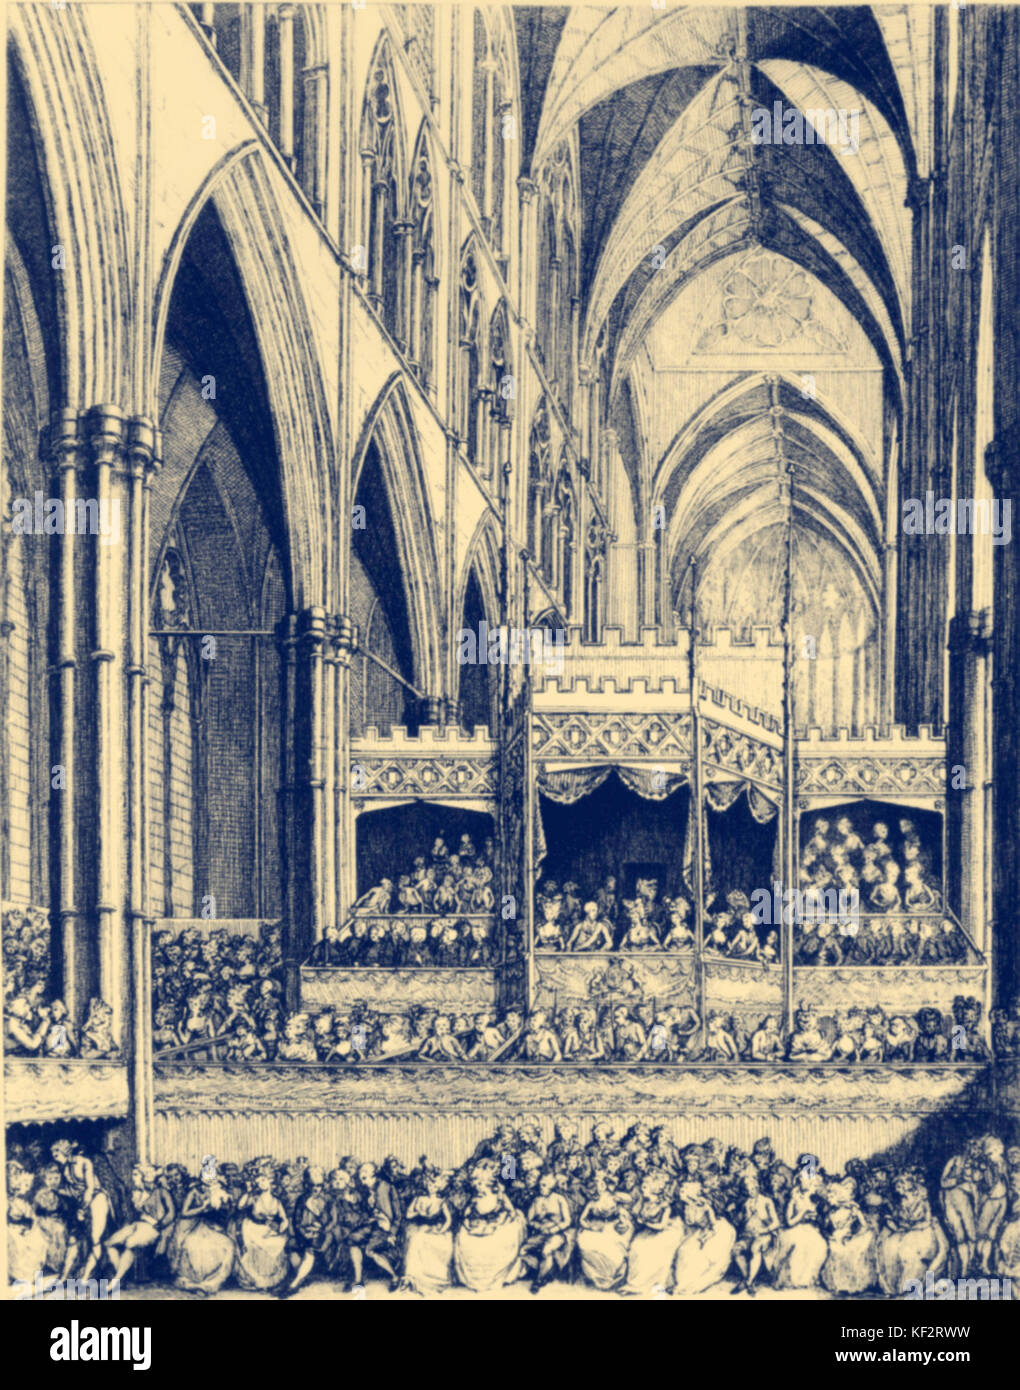 Handel's commemoration  -audience at Westminster Abbey in 1784. German-English composer, 1685-1759. Stock Photo